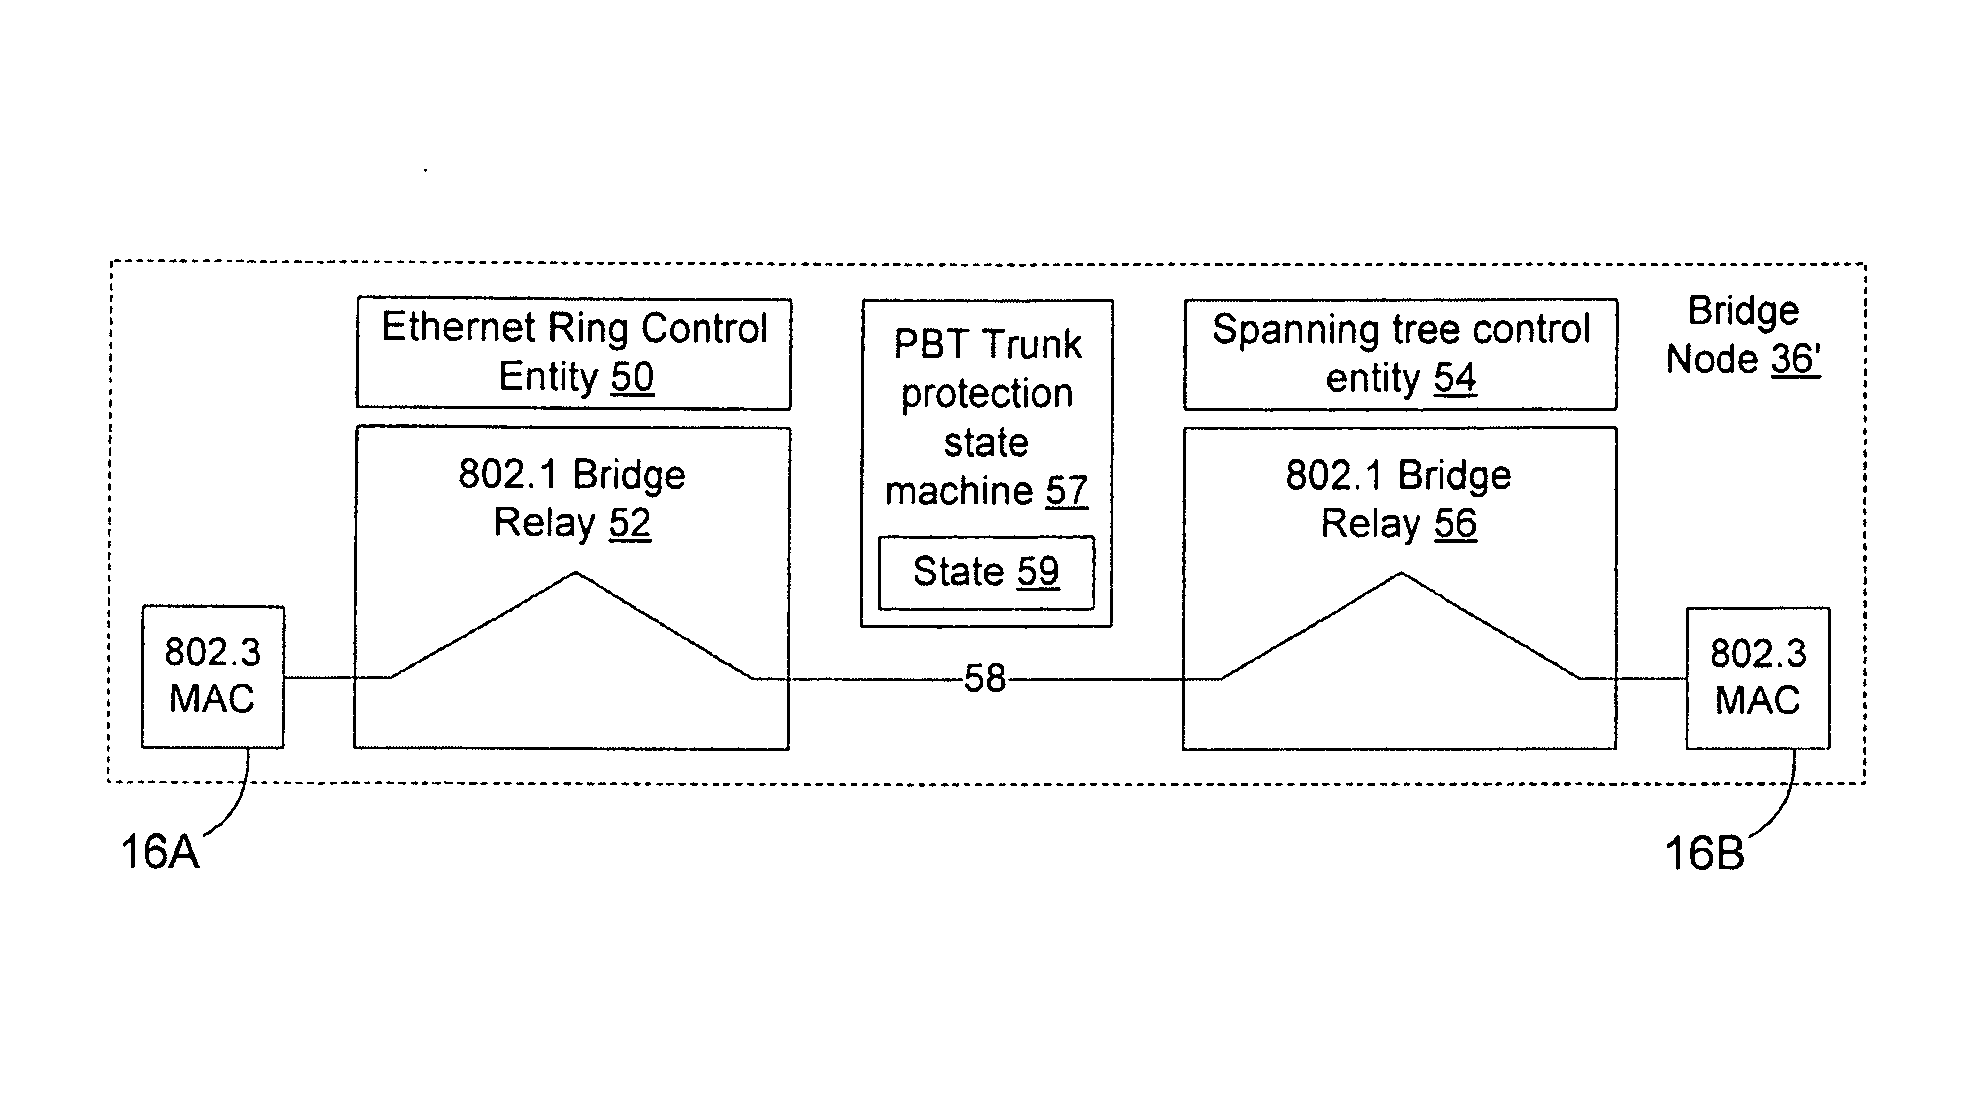 Interworking an ethernet ring network and an ethernet network with traffic engineered trunks